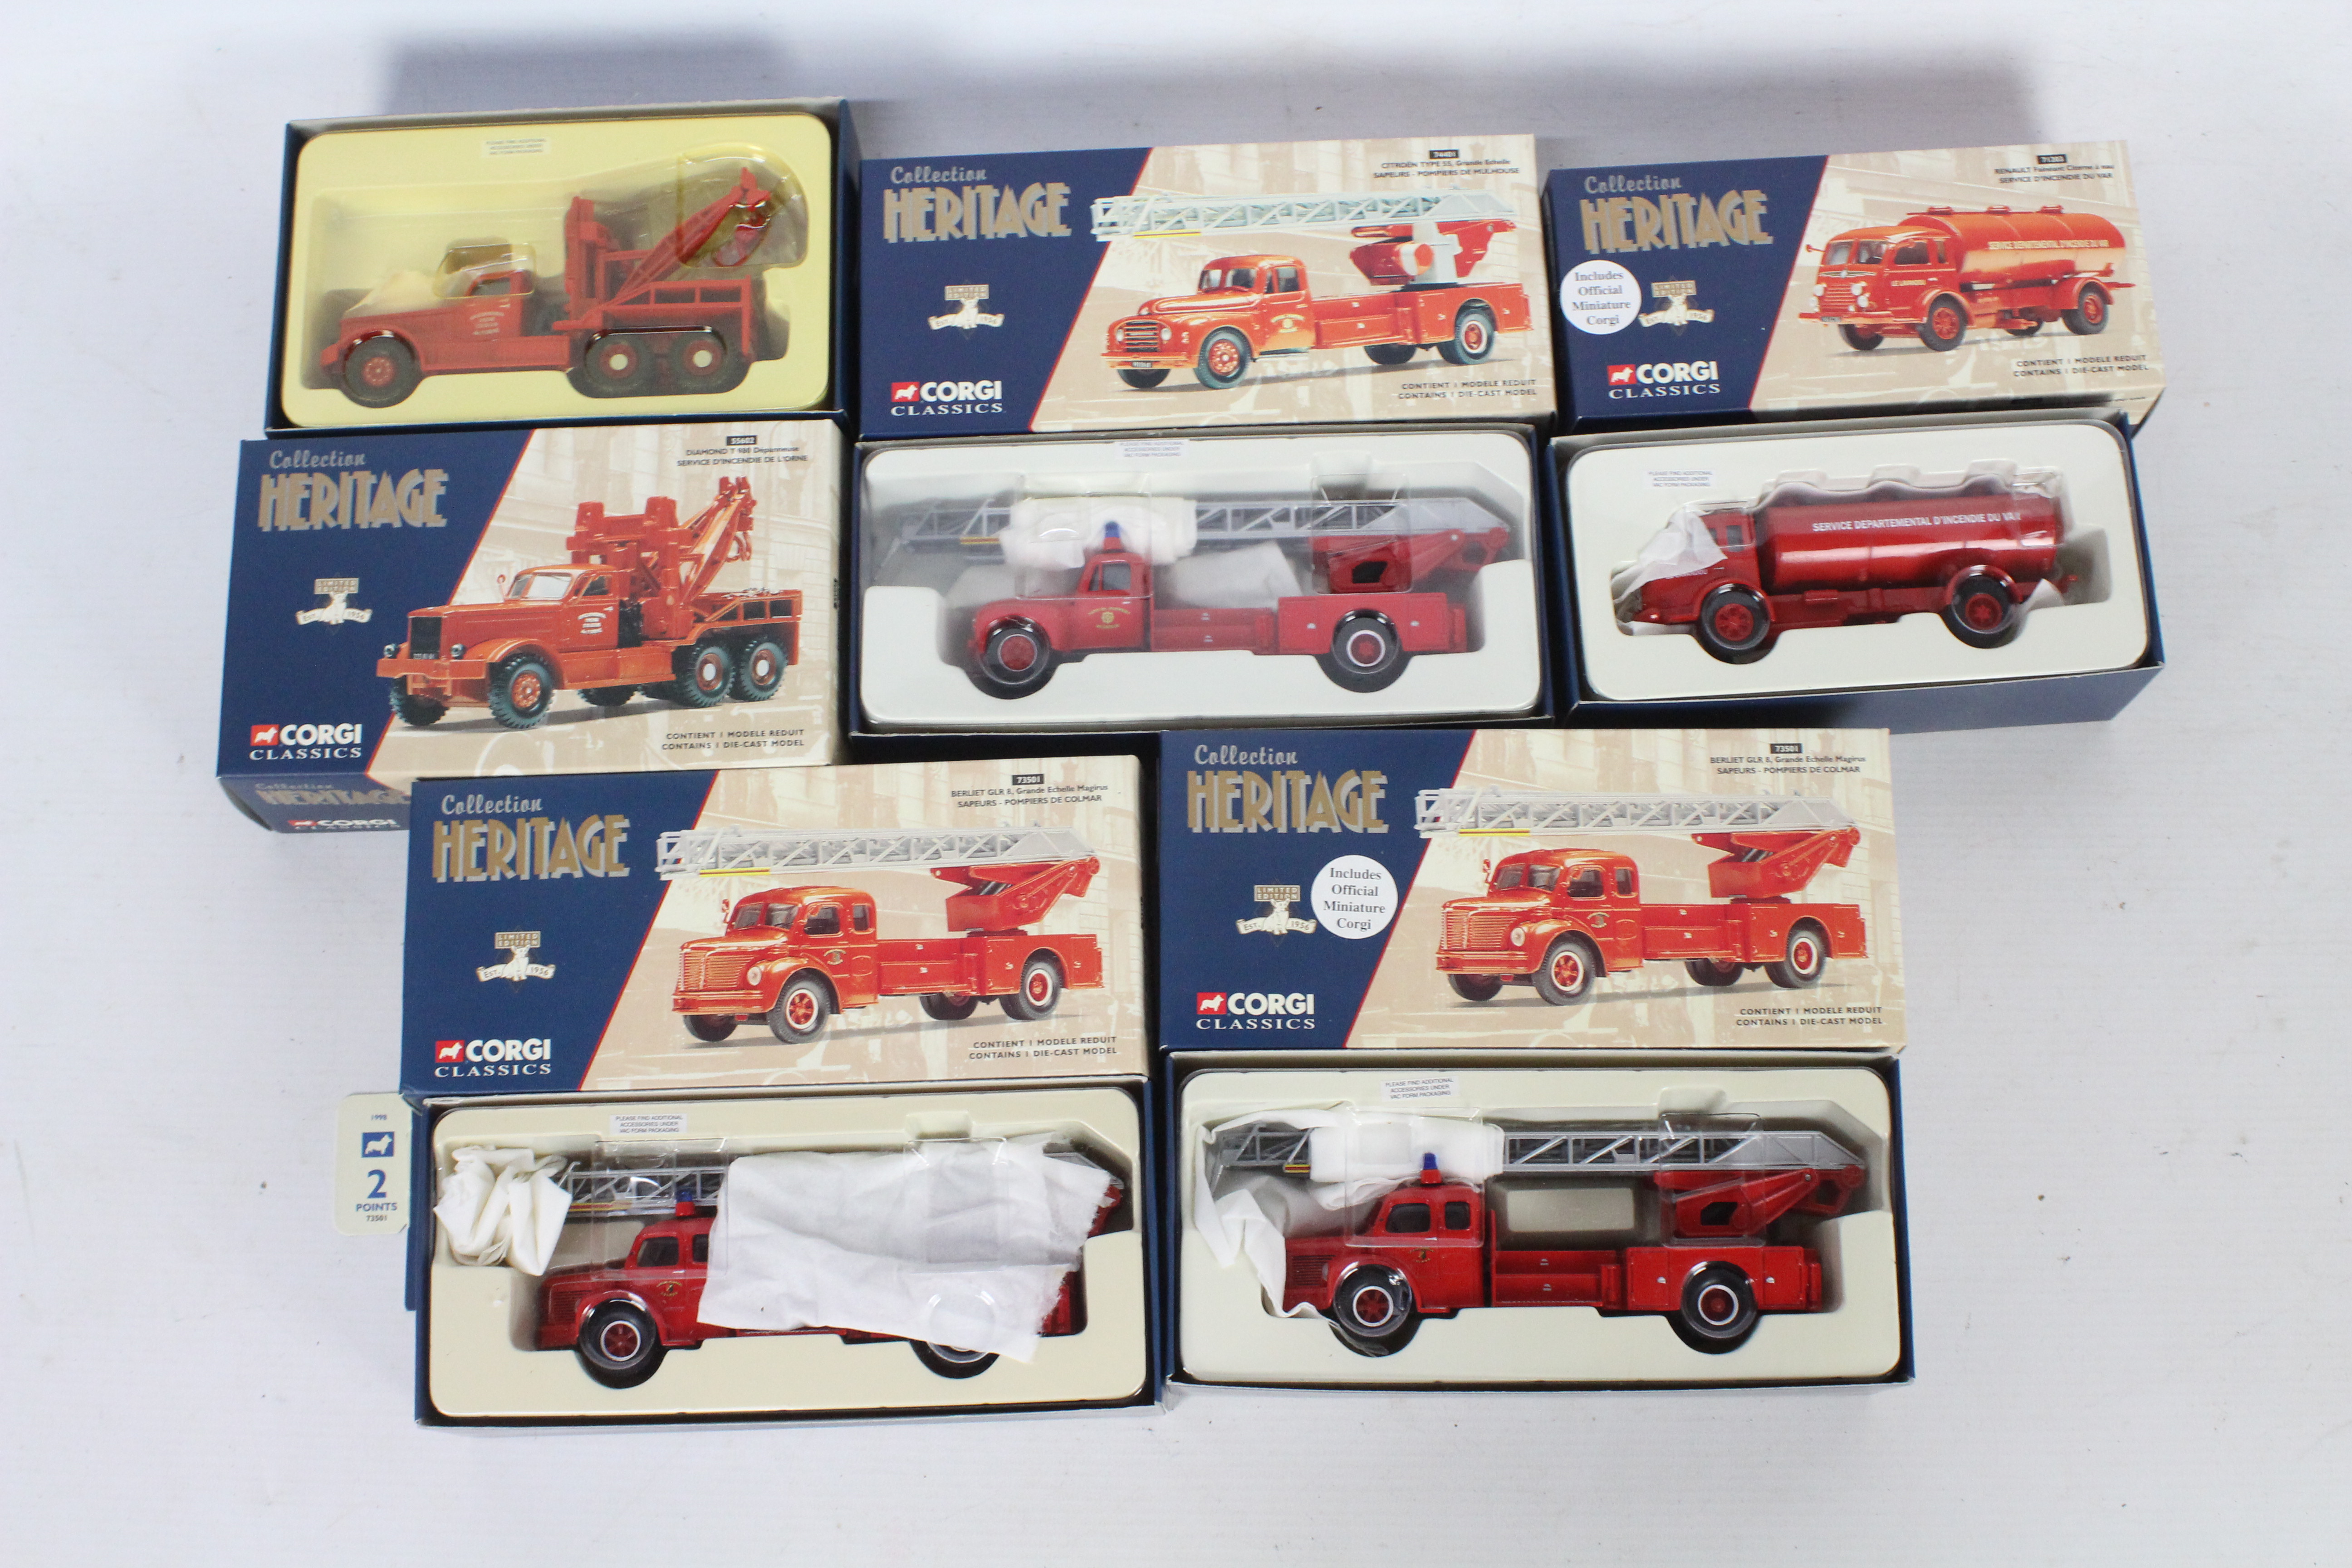 Corgi - Five boxed Limited Edition diecast model Fire Appliances from the Corgi Heritage Collection